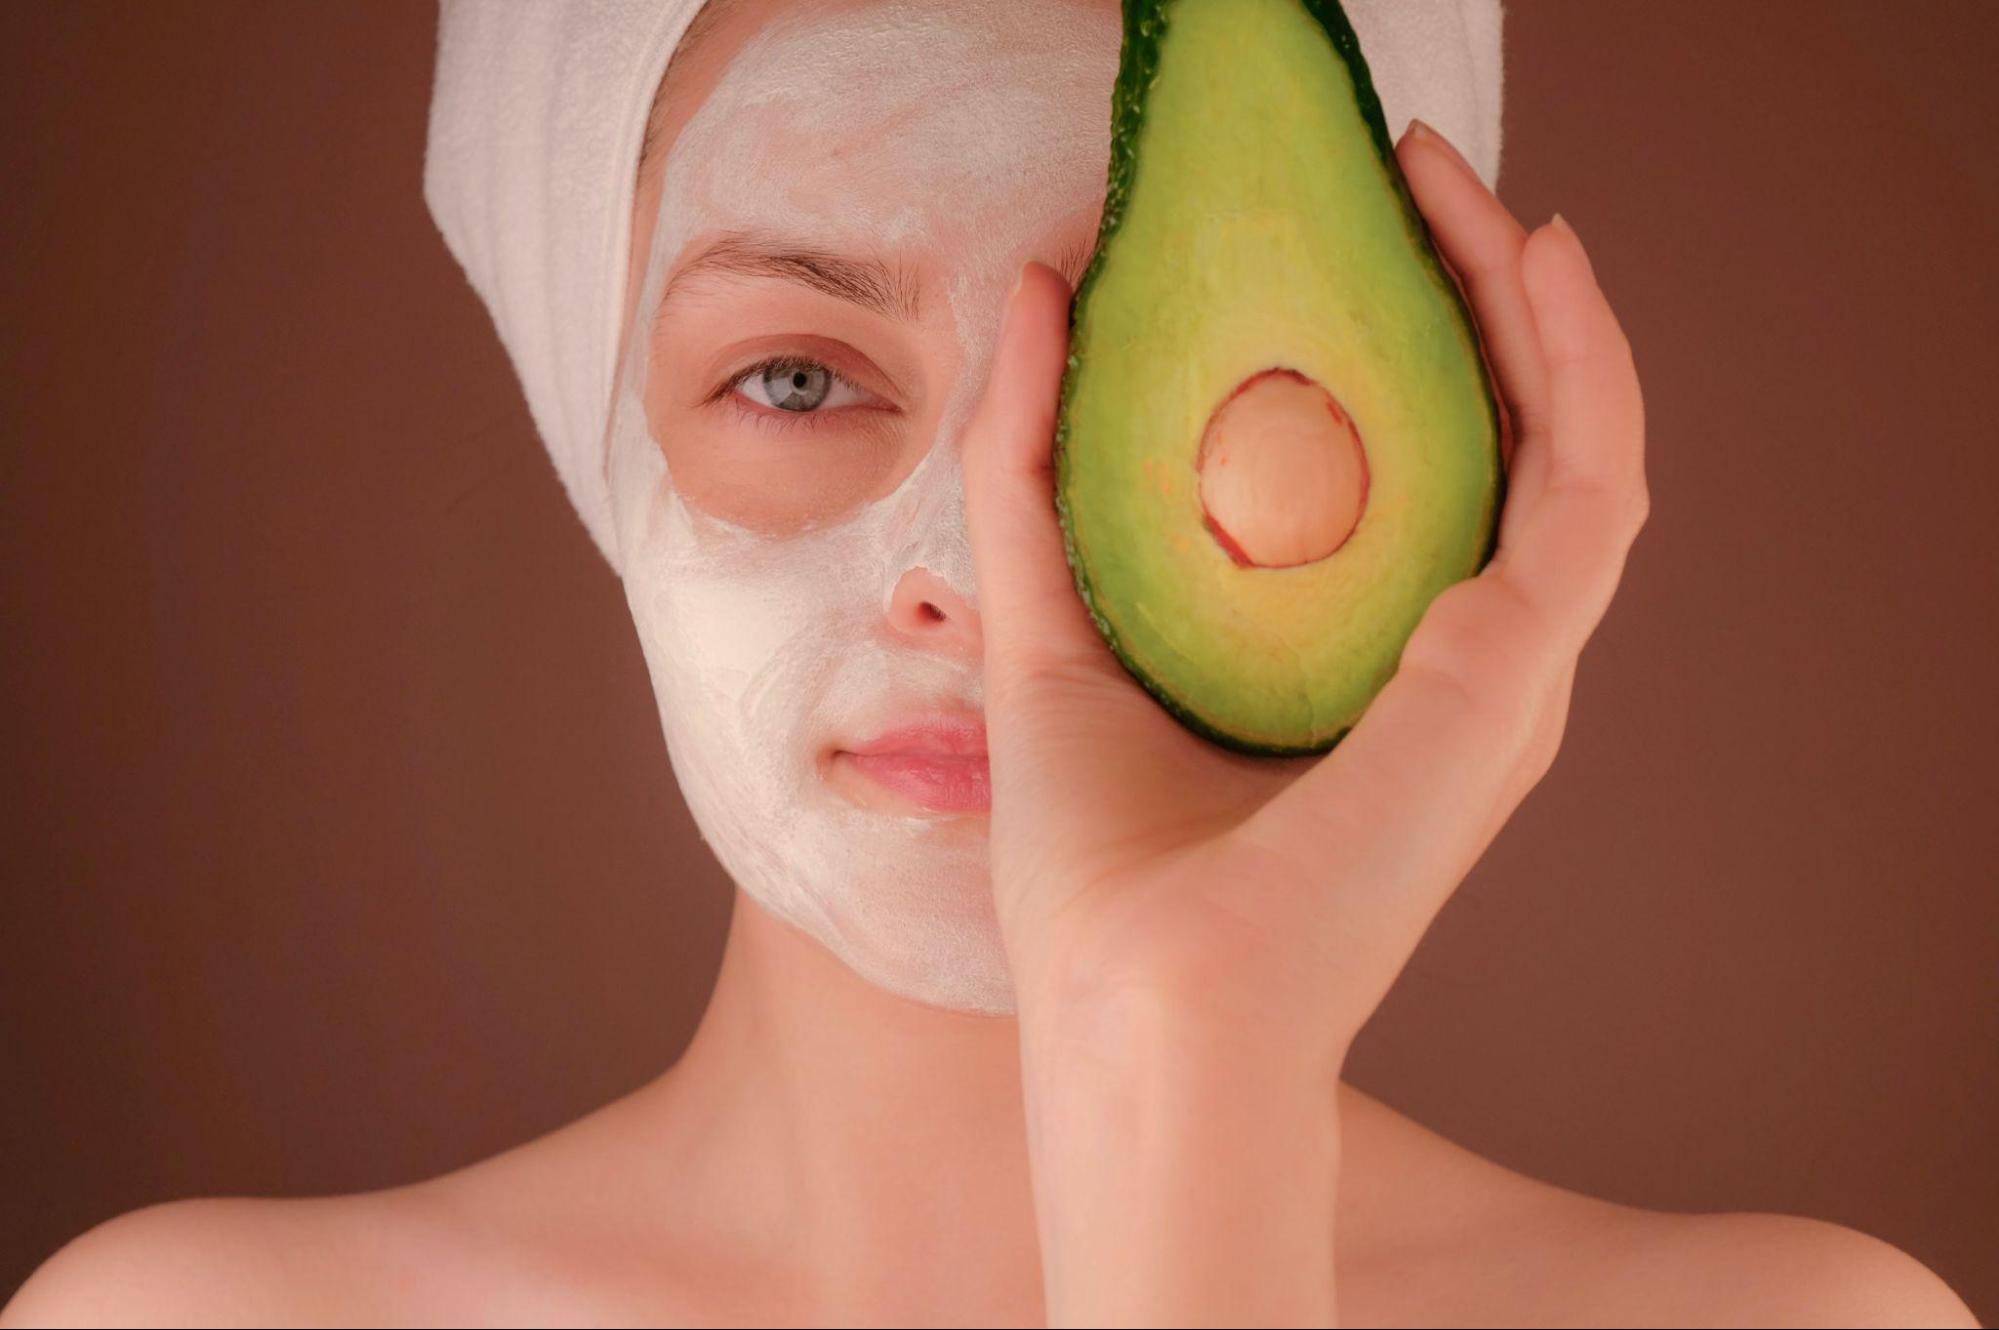 A Vegan Beauty Regimen Can Keep Your Skin Looking And Feeling Healthy